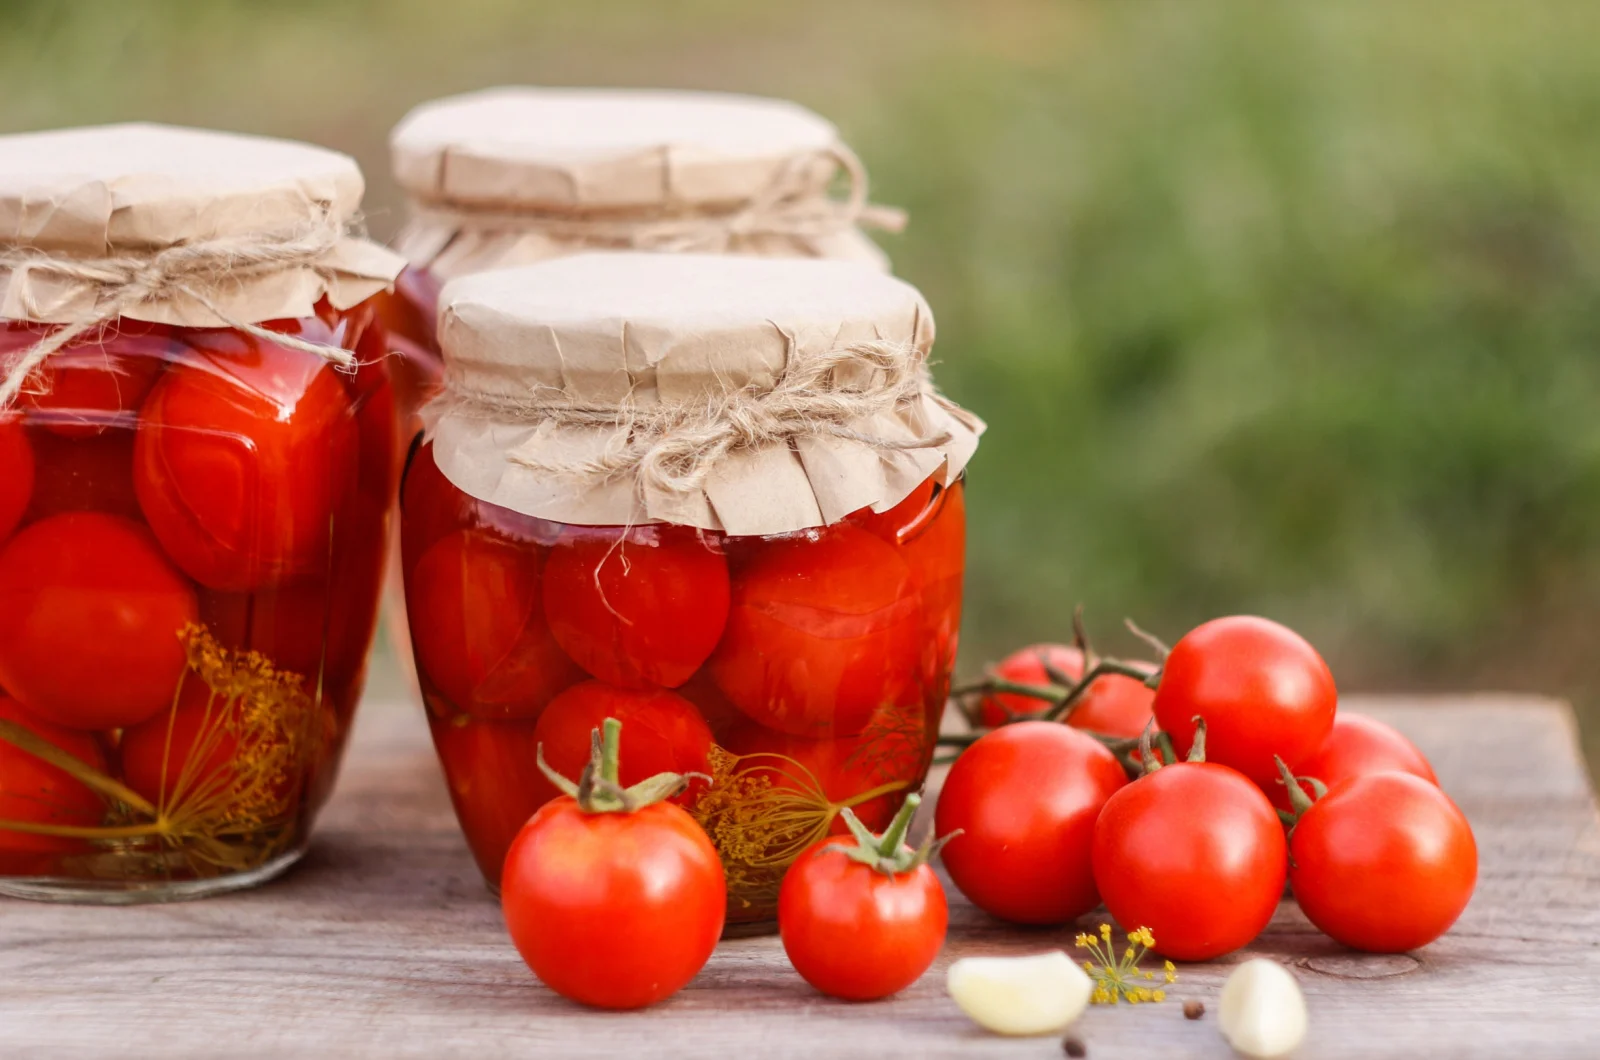 cherry tomatoes in jar on a wooden table